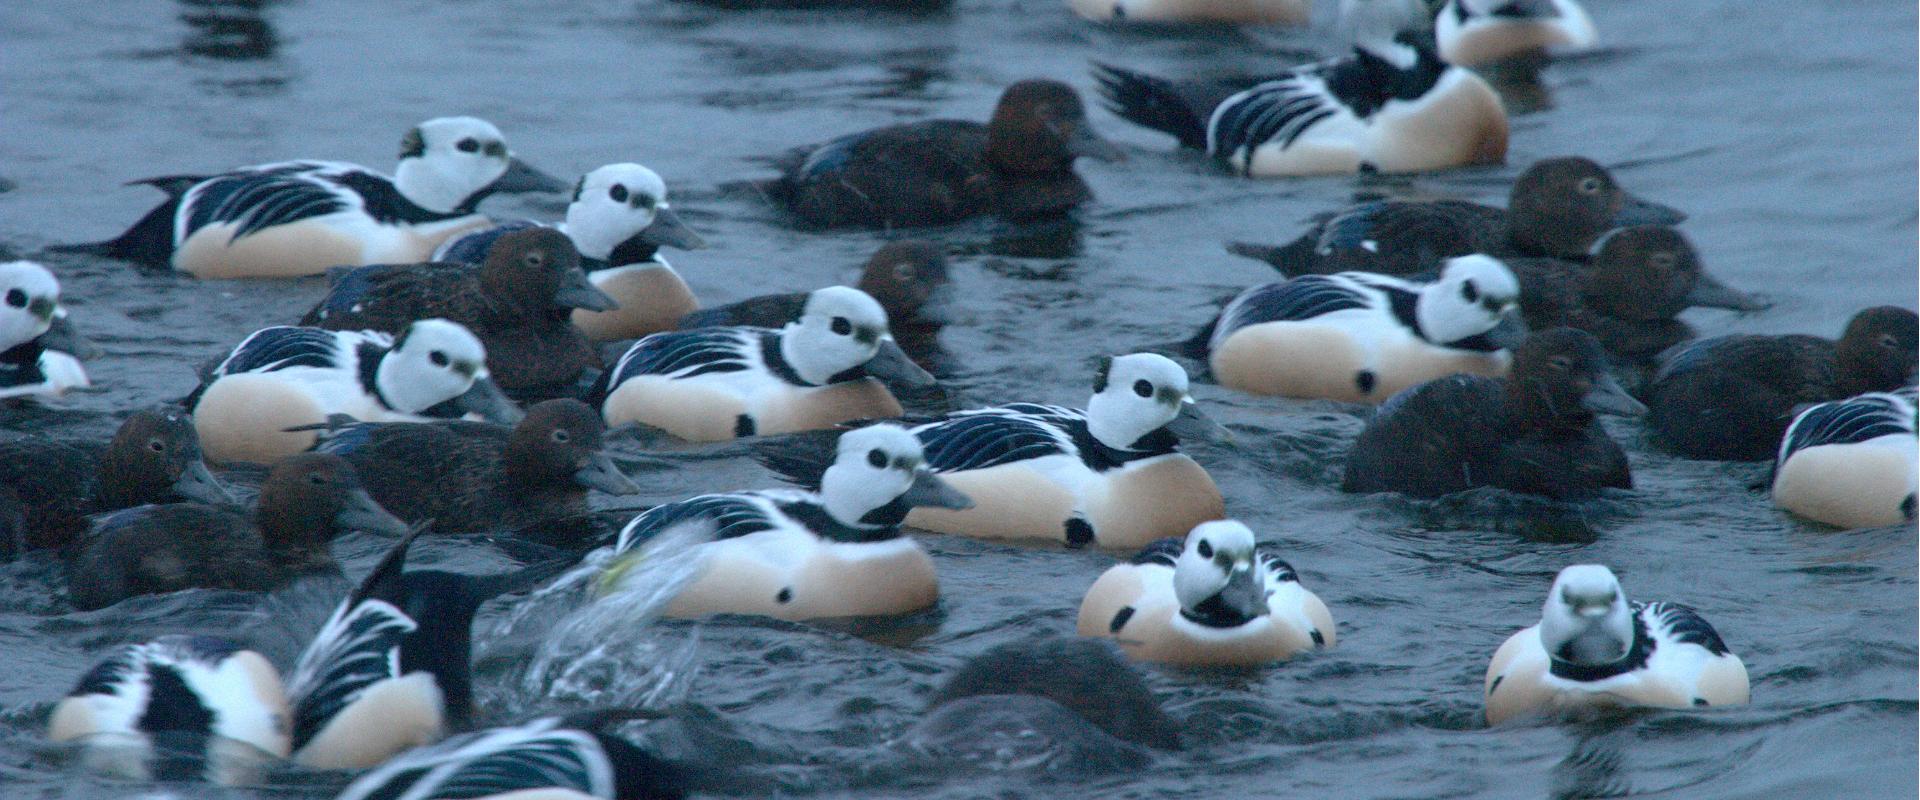 About 2,000 Stellers Eiders winter in Western Estonian coastal waters. In Early spring, they come closer to shore and are easier to see. At the same t